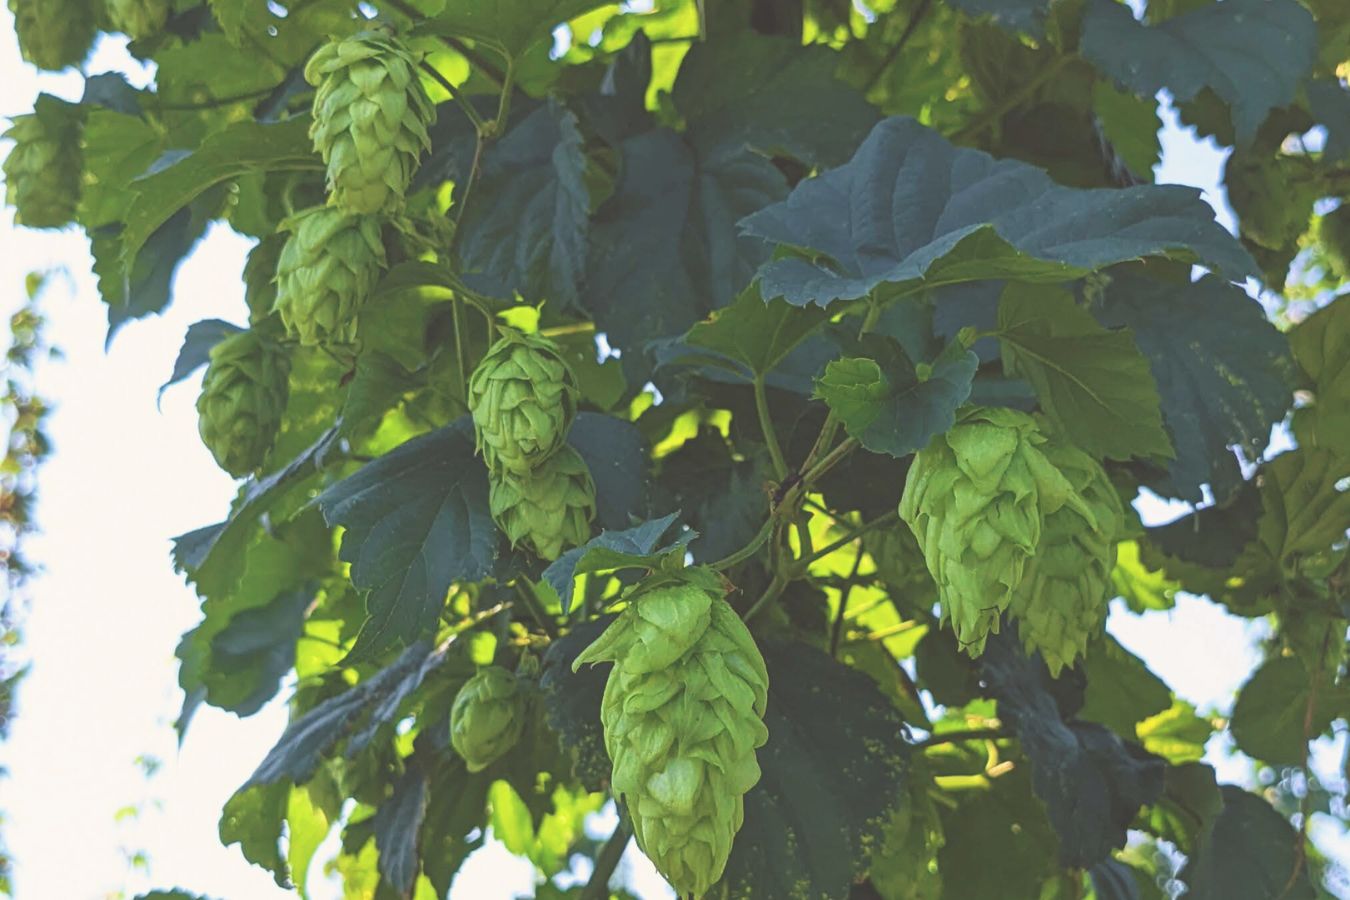 “Heavy Seas Beer Collaborates with University of Maryland Extension on Groundbreaking Maryland-Native Hop Beer Series” | Press Release